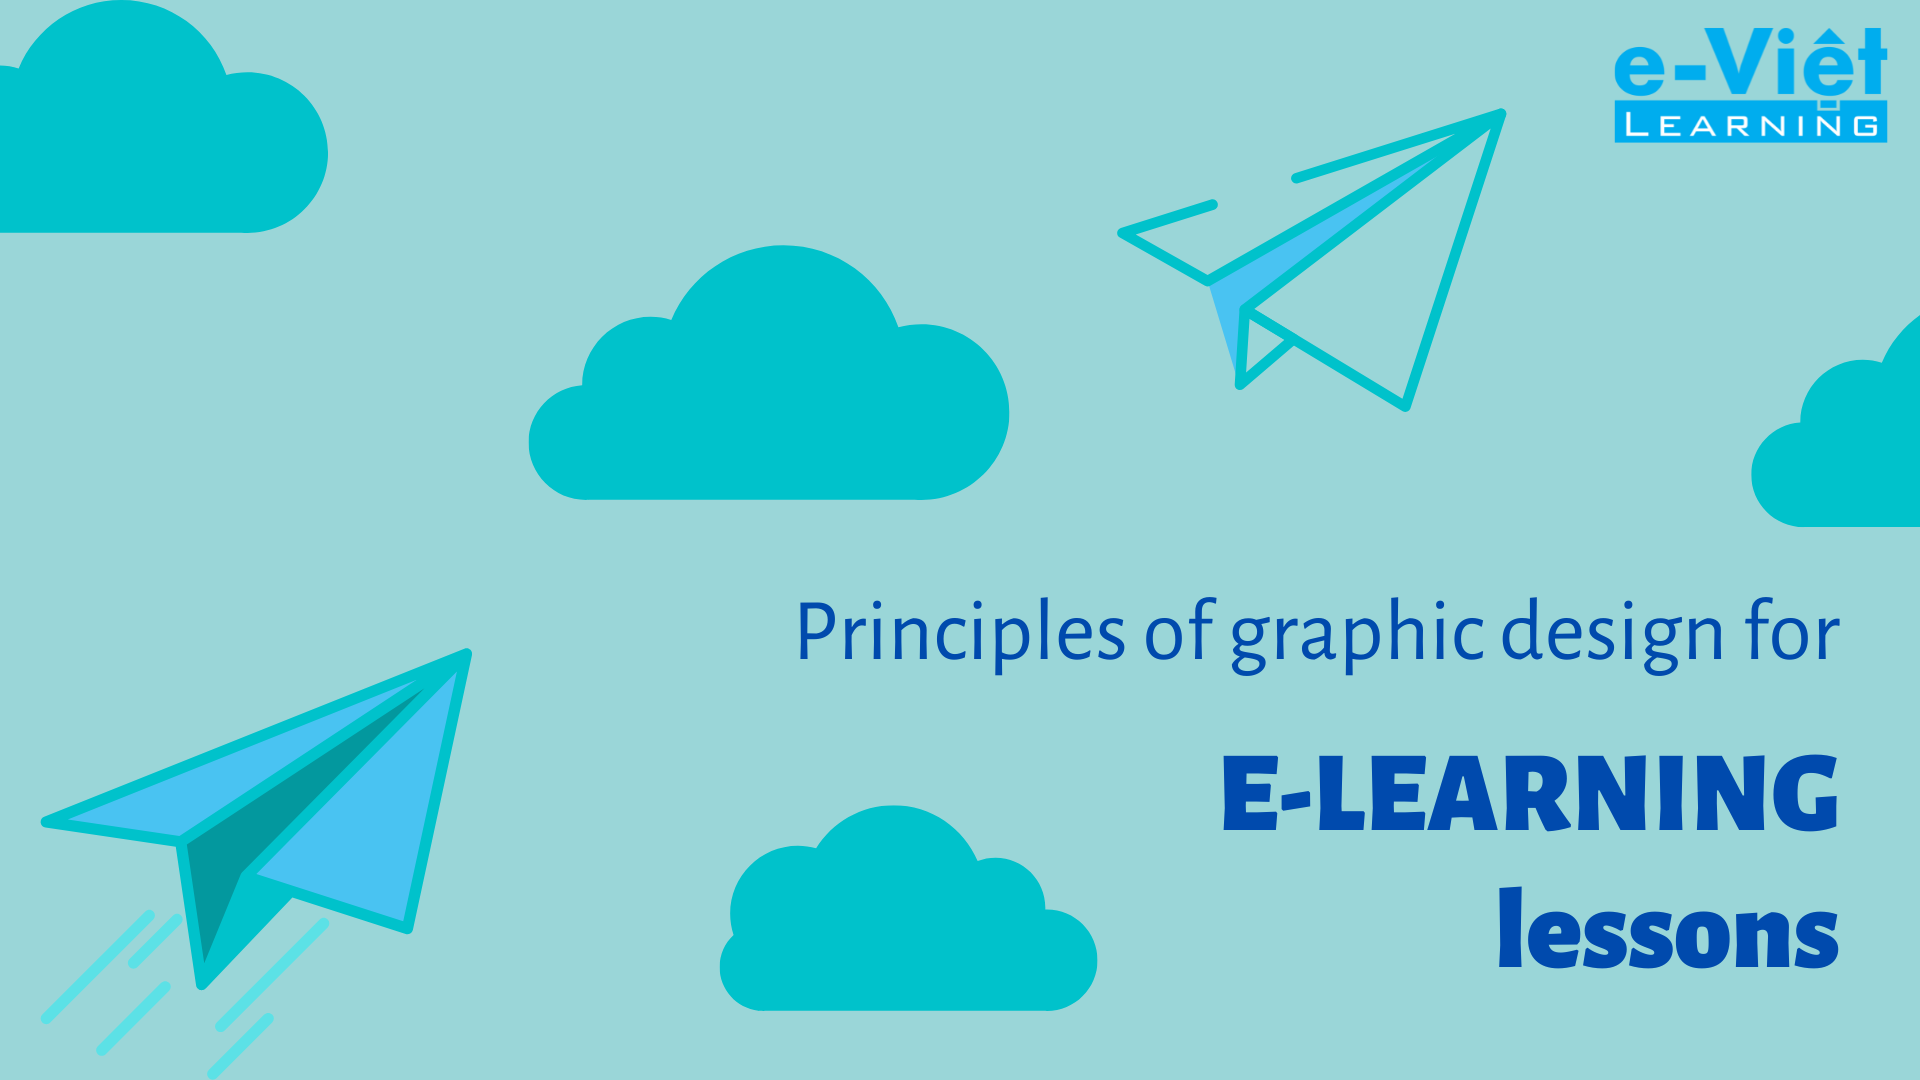 Principles of graphic design for E-Learning lessons